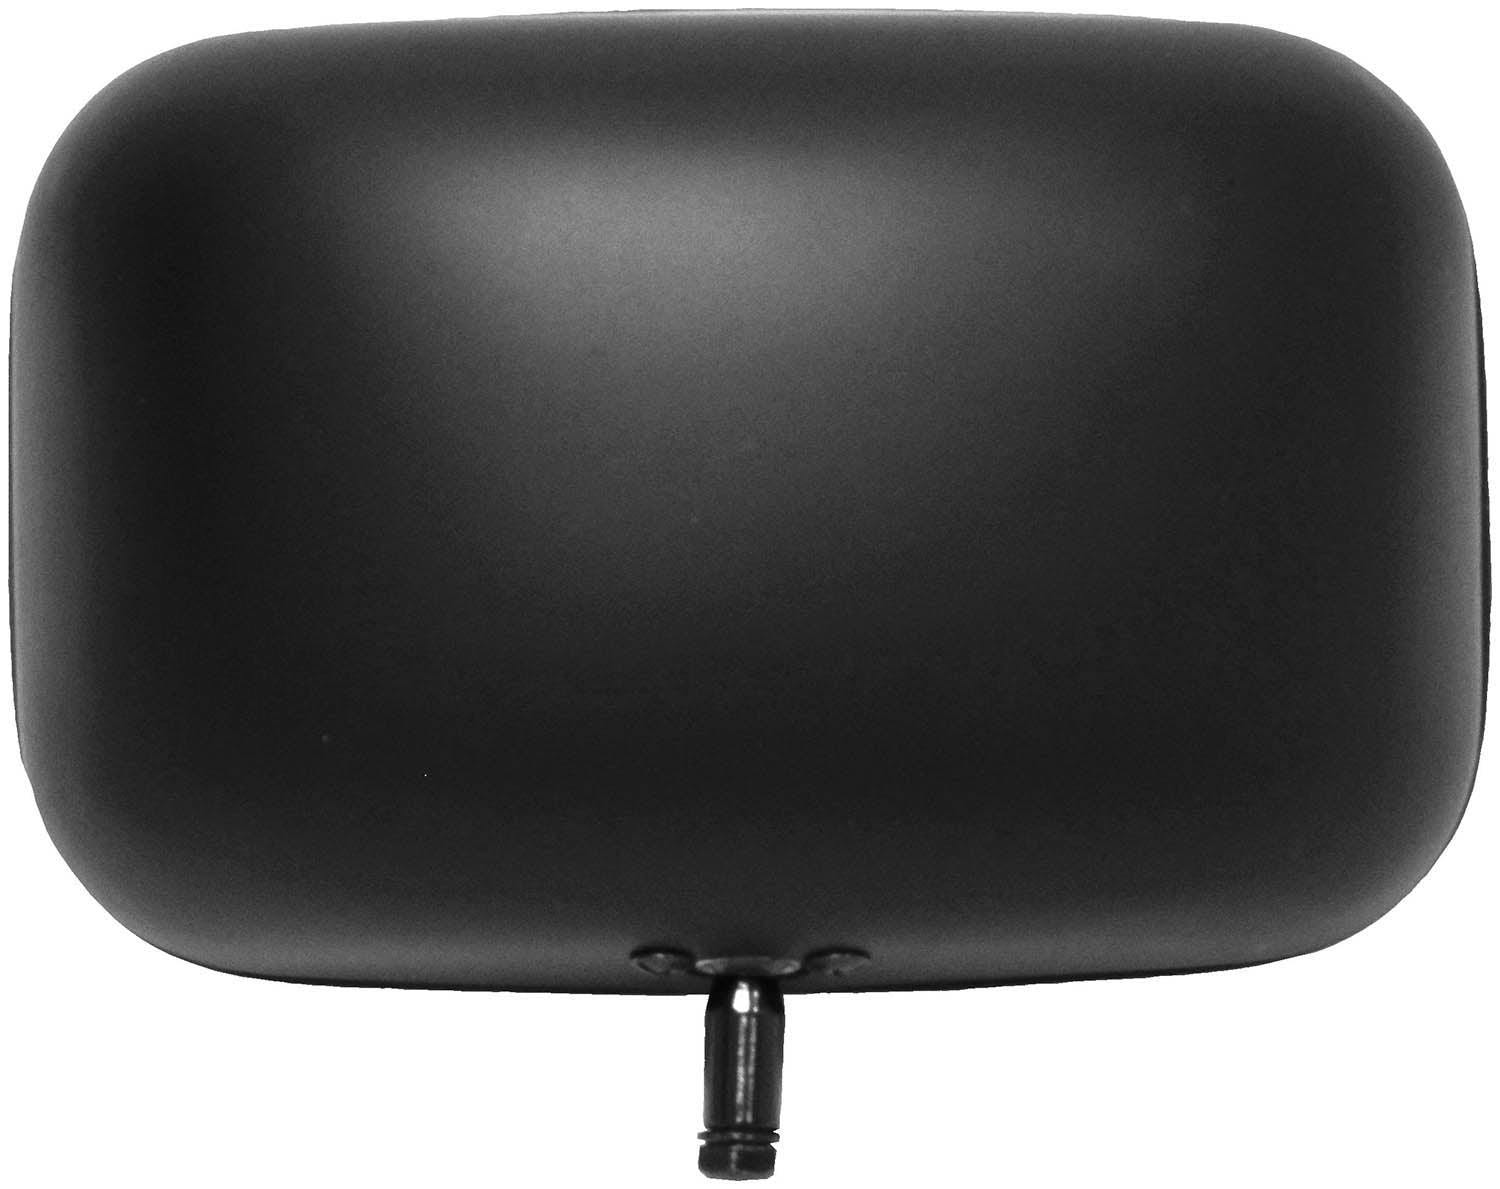 Mirror, Replacement Head, Low-Mount, Black, 8.75"X6", bulk pack (Pack of 16)